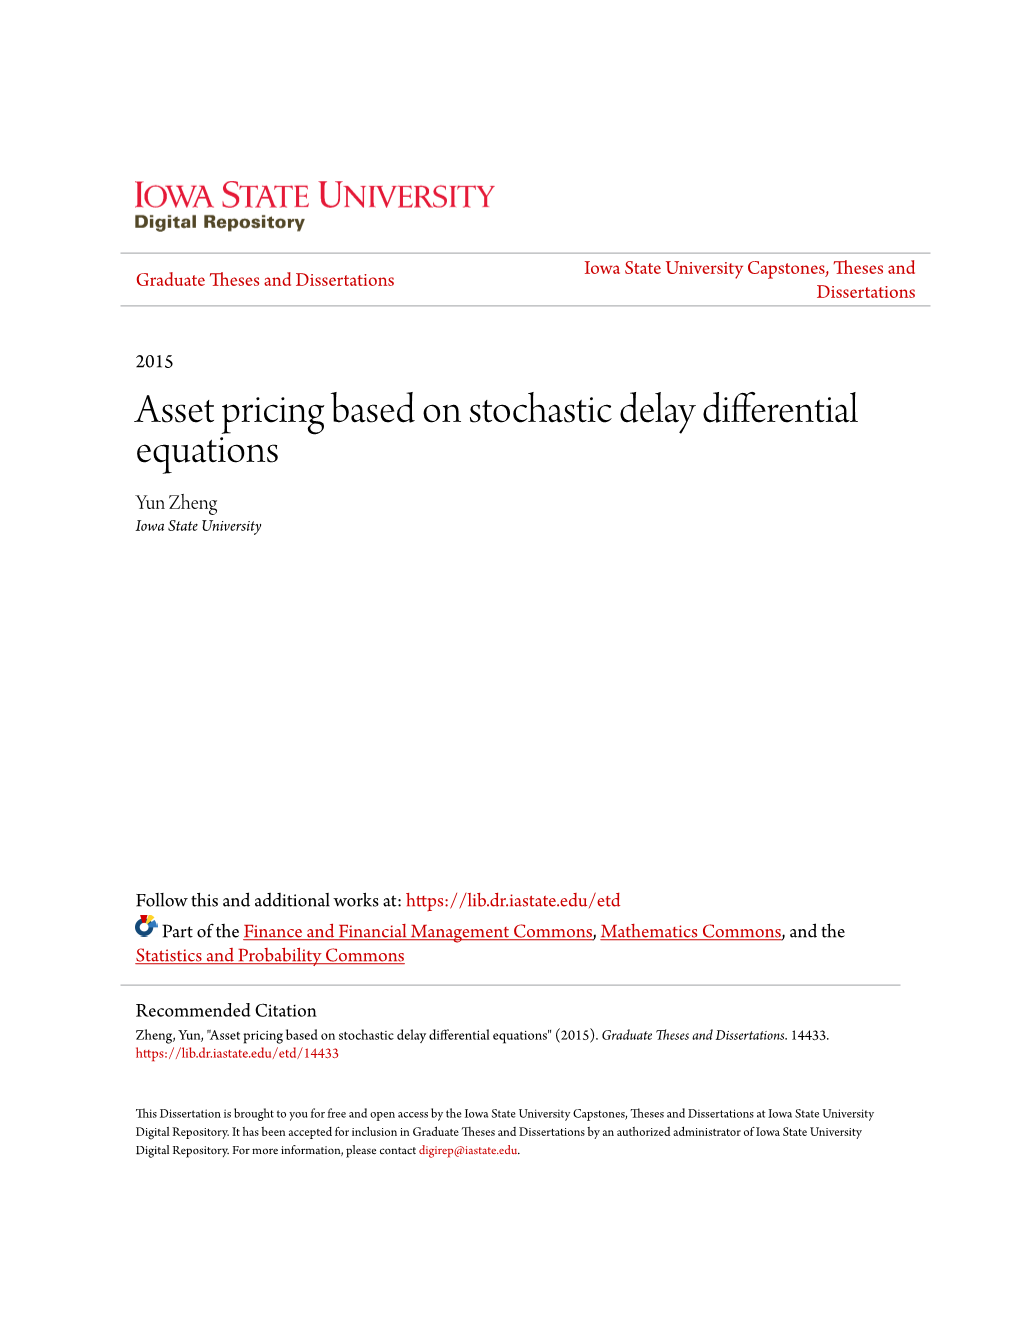 Asset Pricing Based on Stochastic Delay Differential Equations Yun Zheng Iowa State University